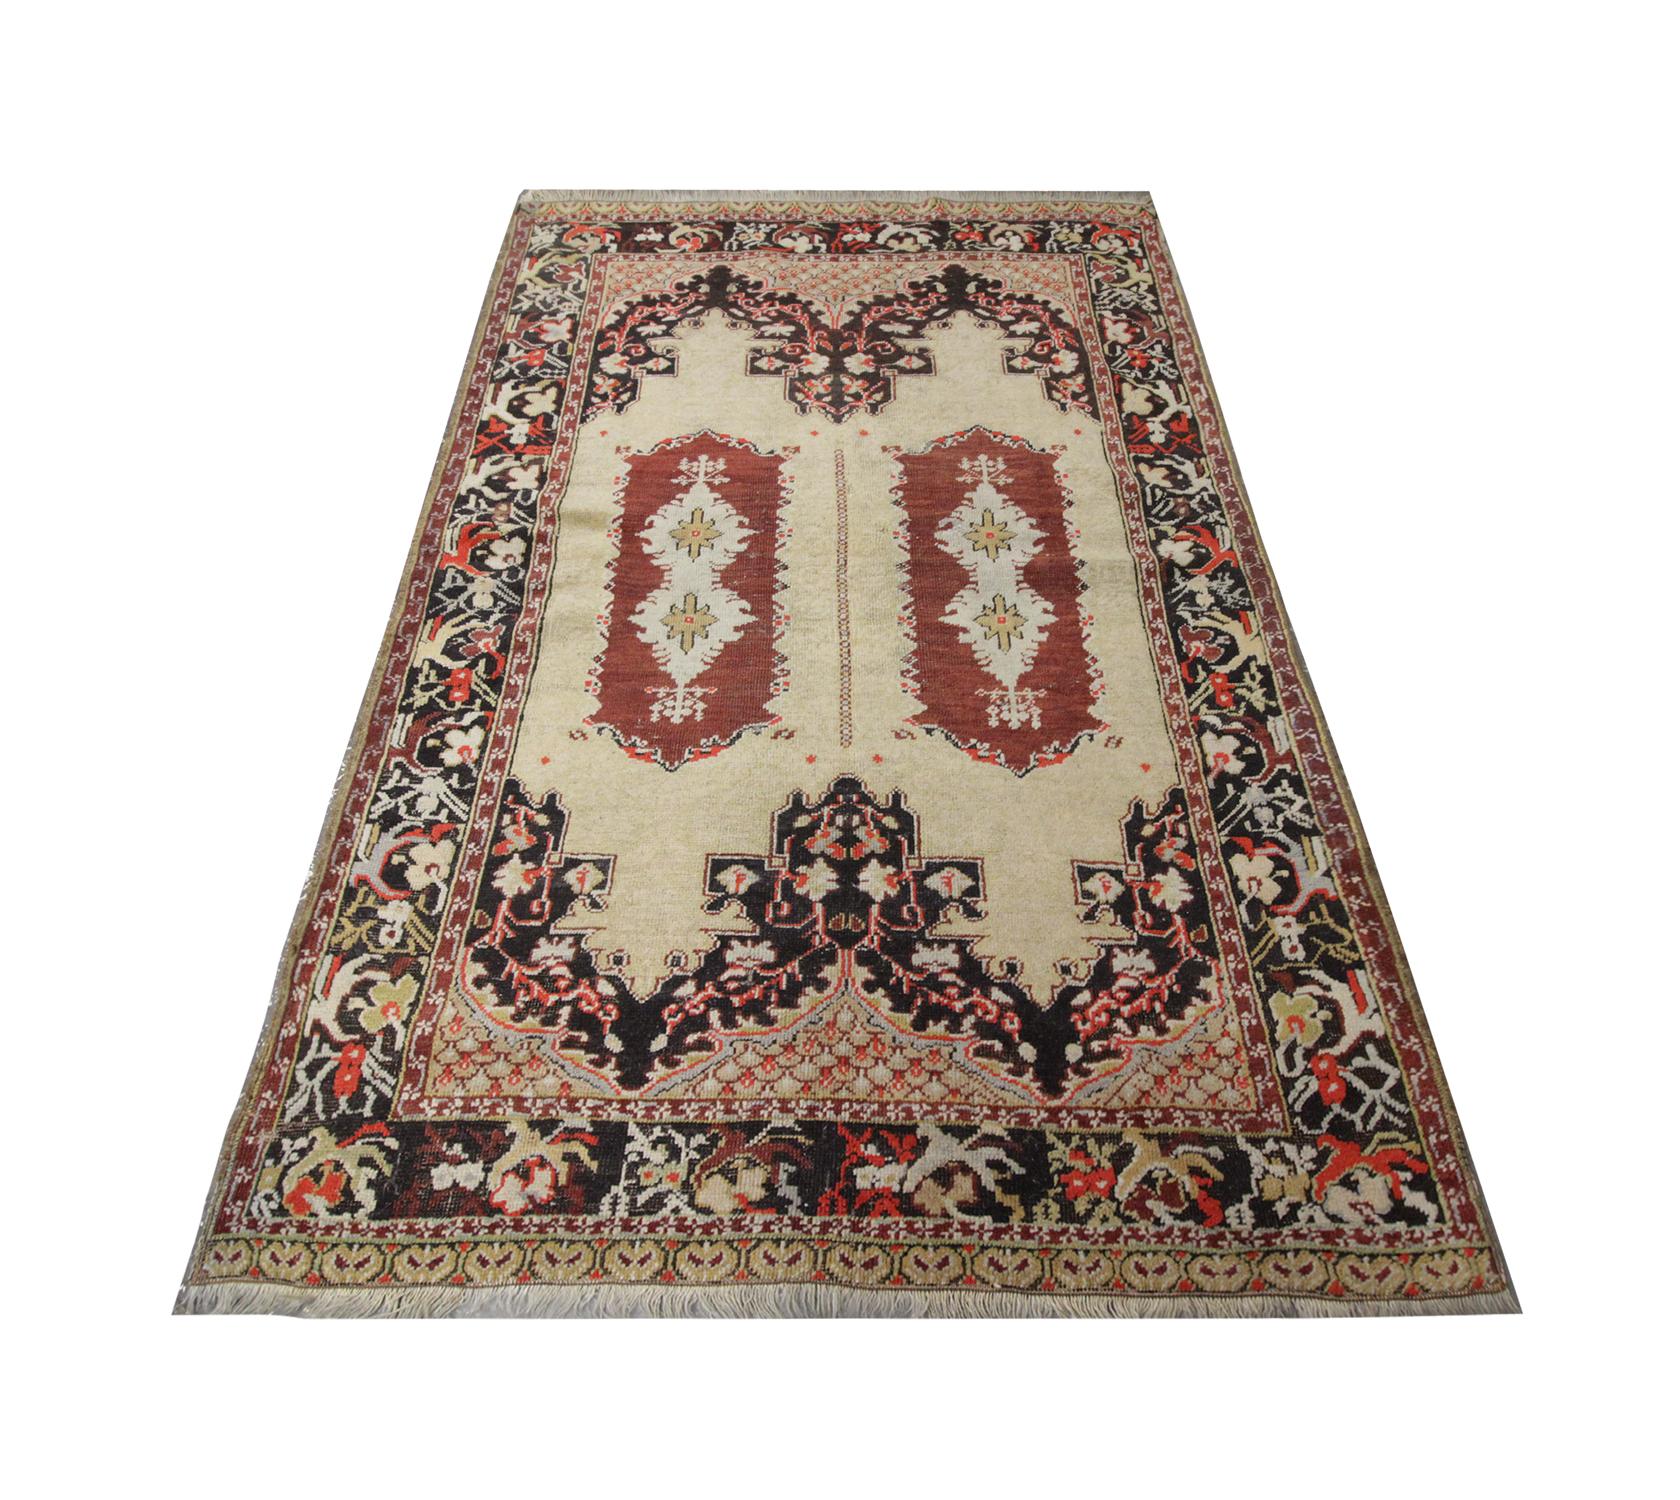 Handmade carpet with two central medallions draw you into this beautiful antique Turkish area rug, woven in deep orange on a cream background, the symmetric design is surrounded by a highly decorative floral pattern and repeat pattern border.